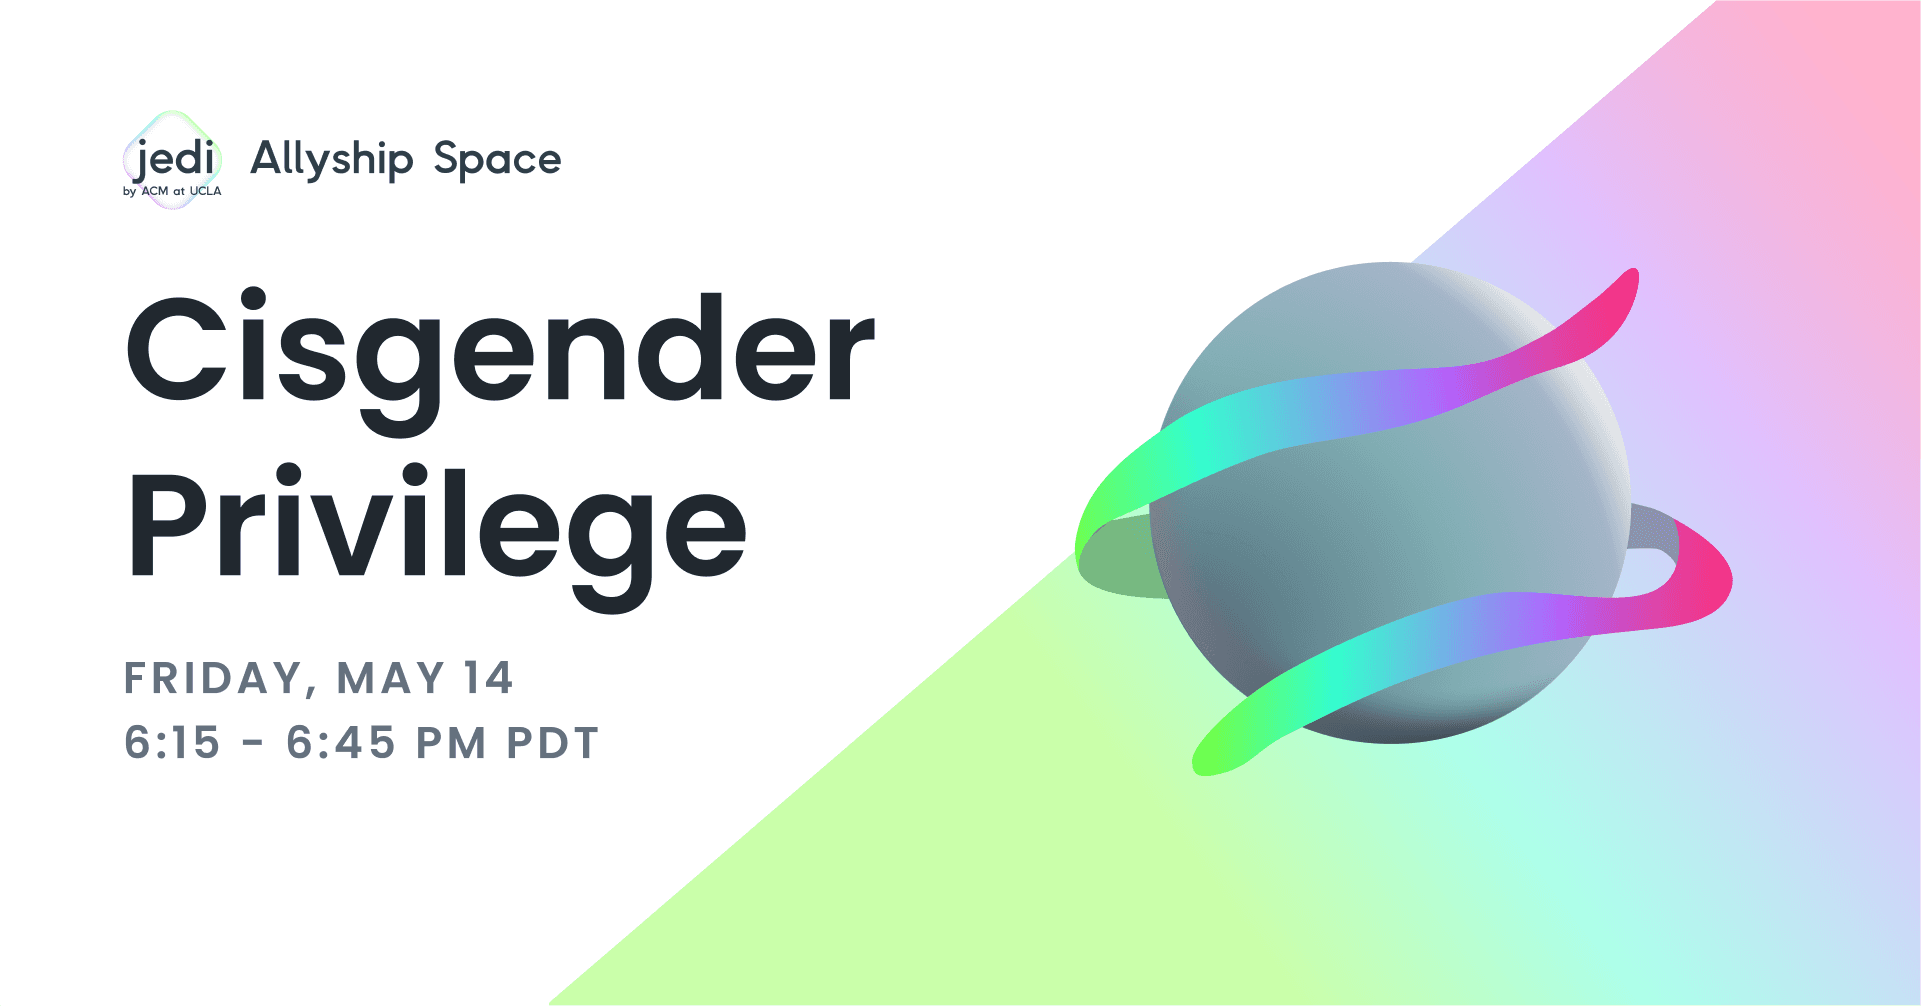 a slide deck titled "Cisgender Privilege", with the date and time as Friday May 14th, 6:15 - 6:45 PM PDT. features an abstract sphere and ribbon.